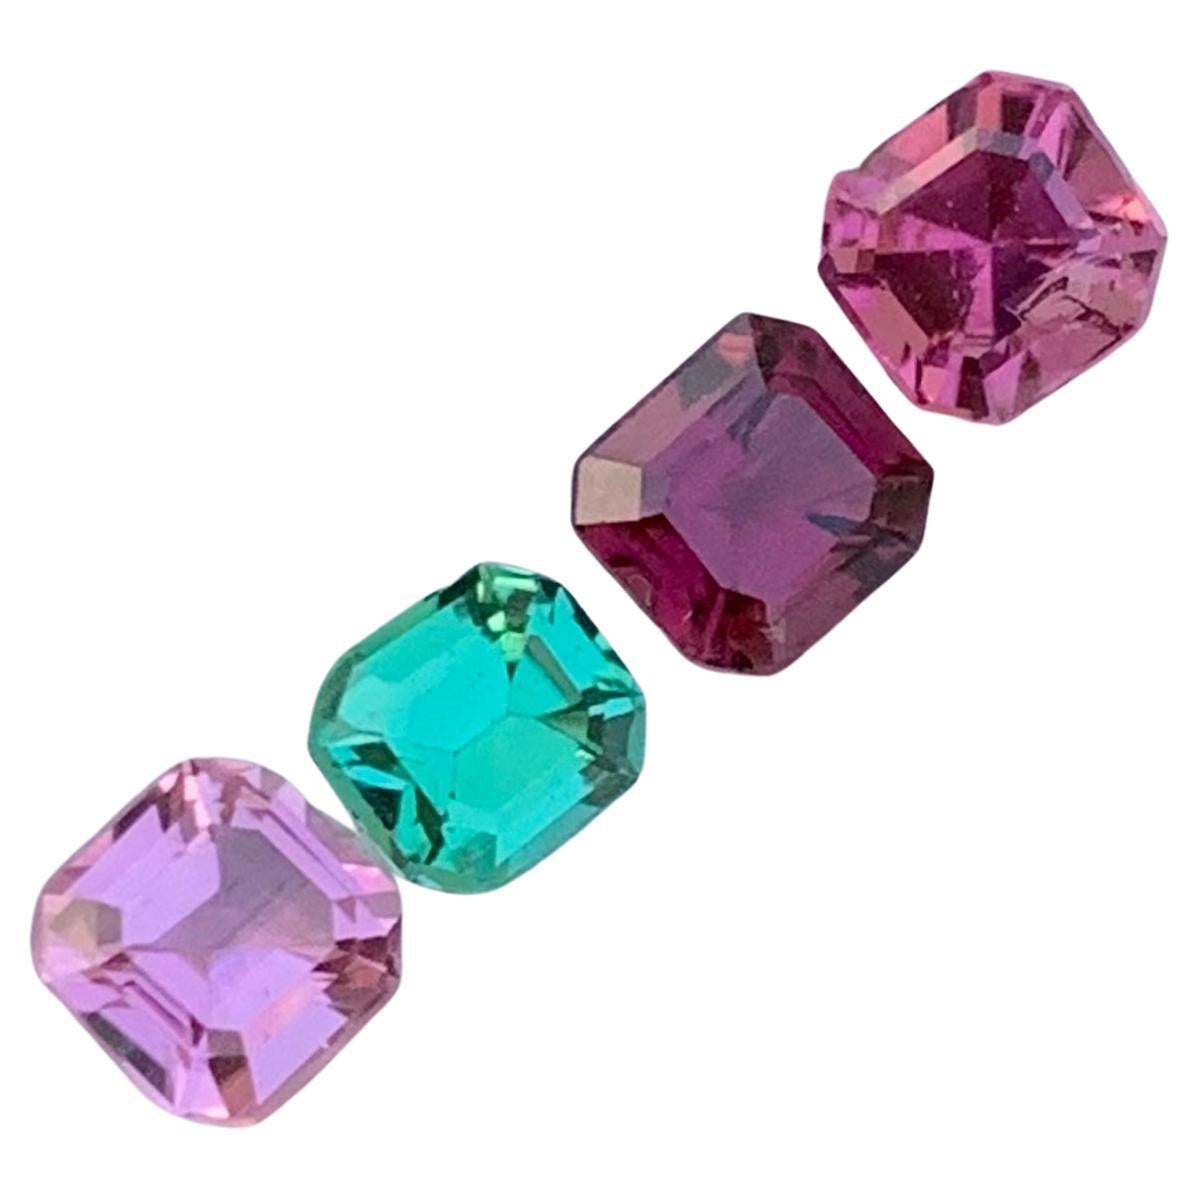 Gorgeous Clean Faceted Tourmaline Lot Set For Jewelry Making 2.70 Carats  For Sale